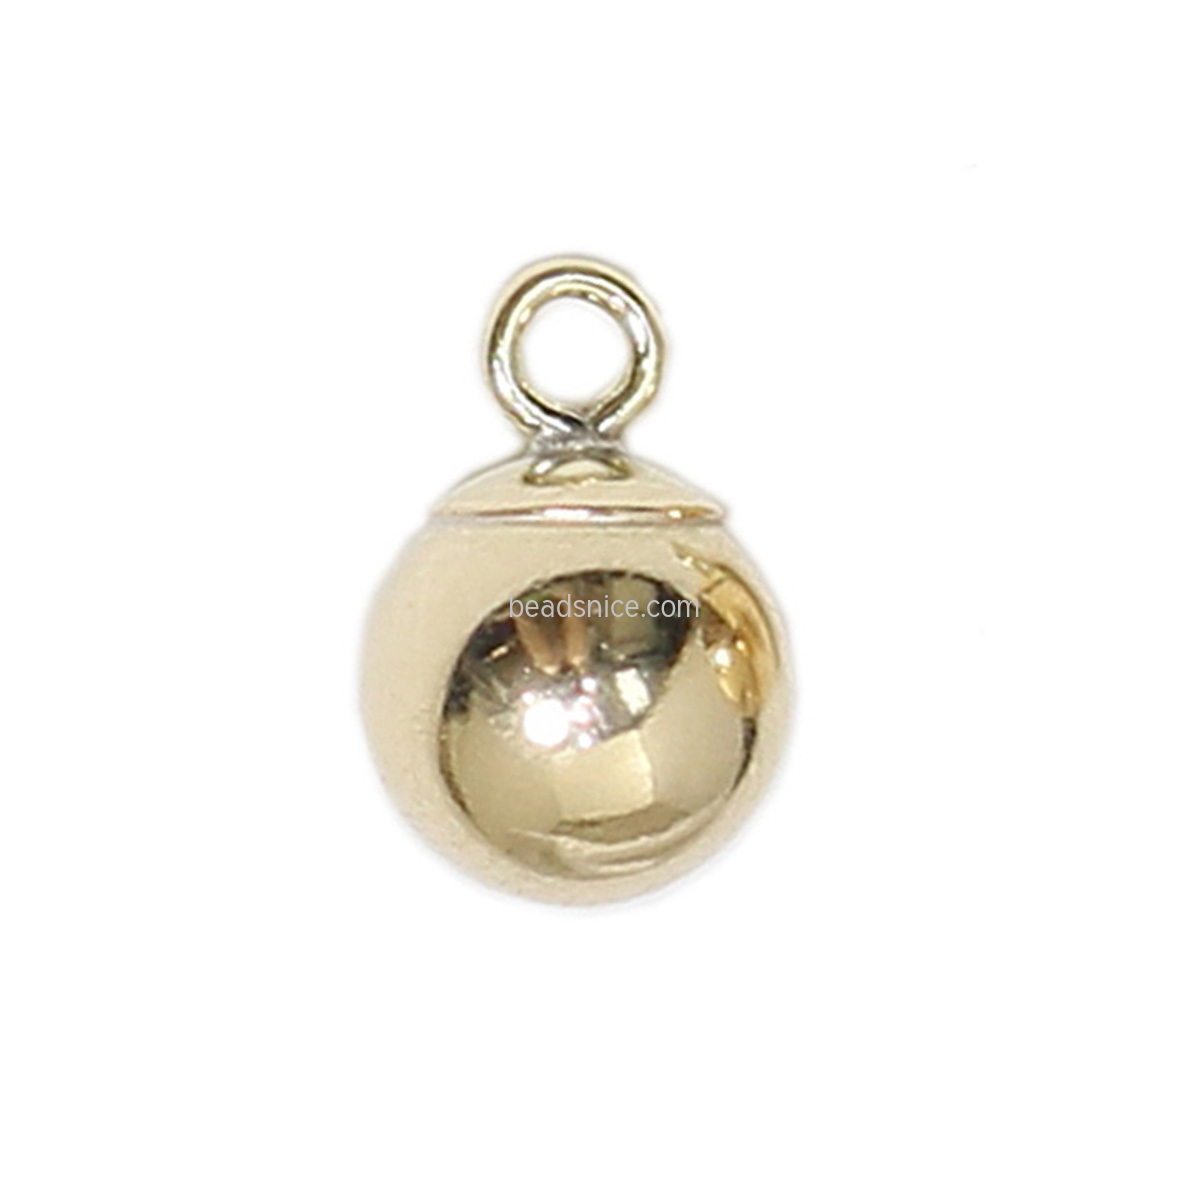 Gold Filled Charm Pendant